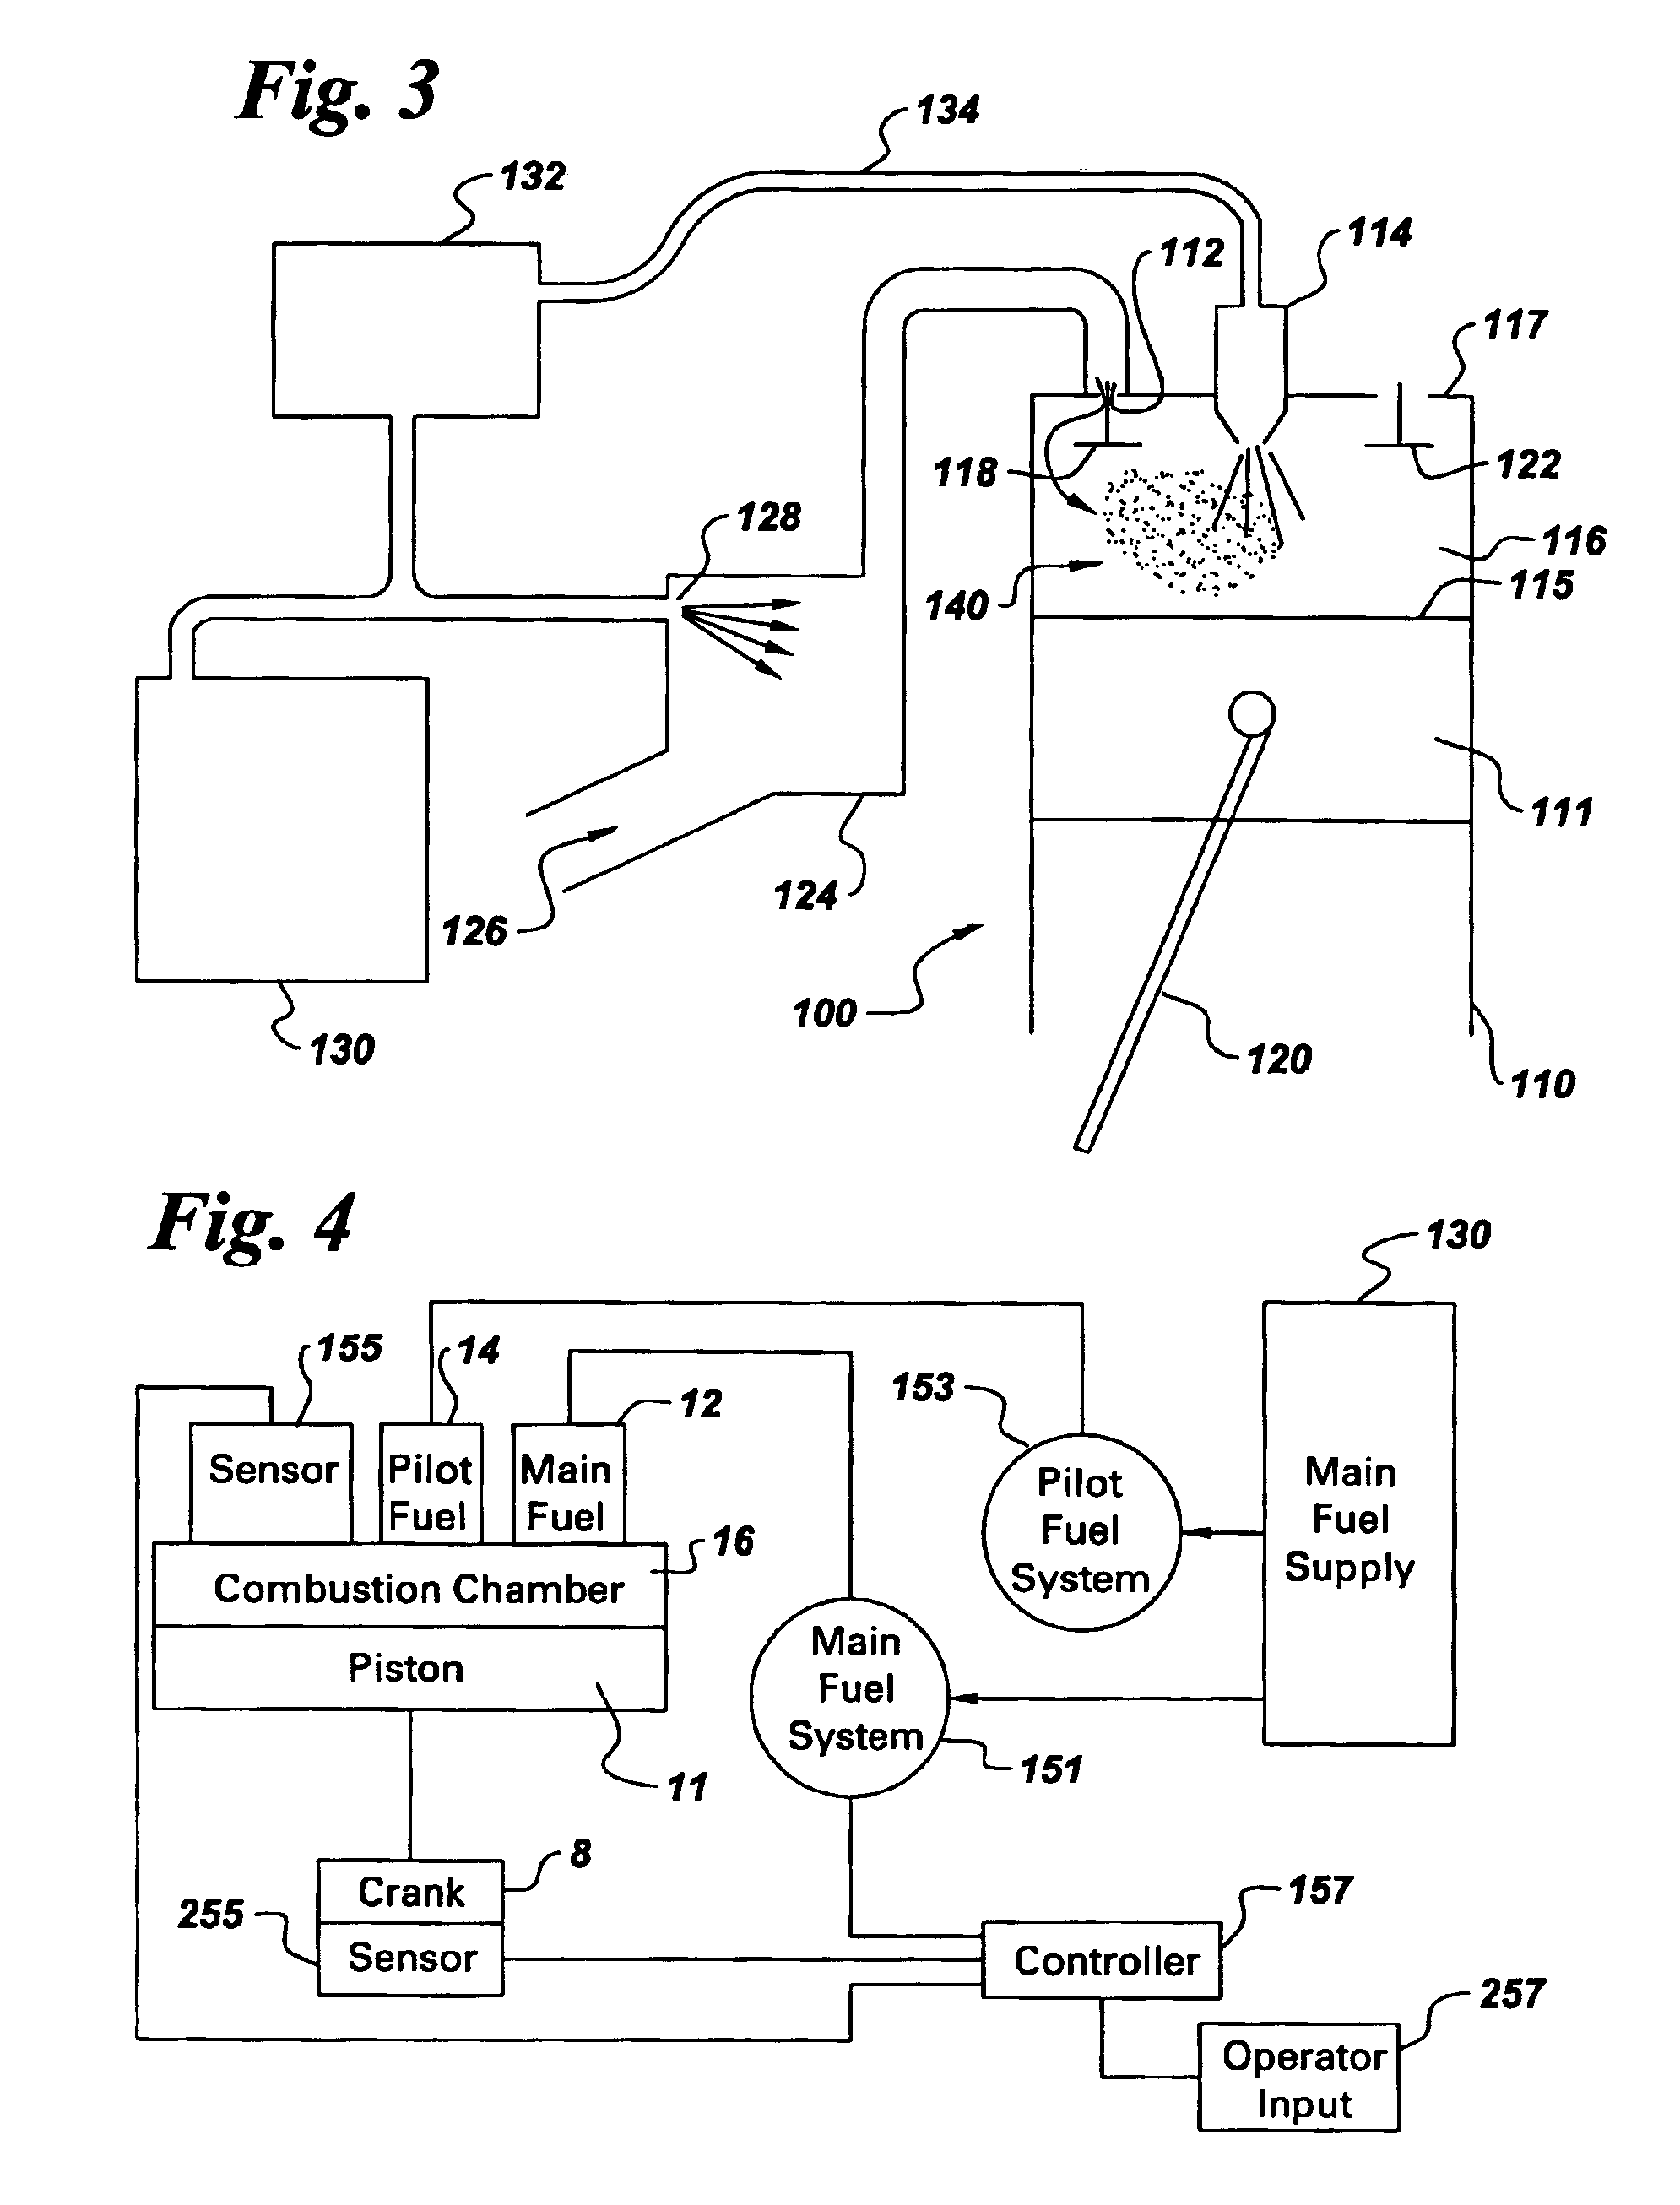 System and method for controlling ignition in internal combustion engines